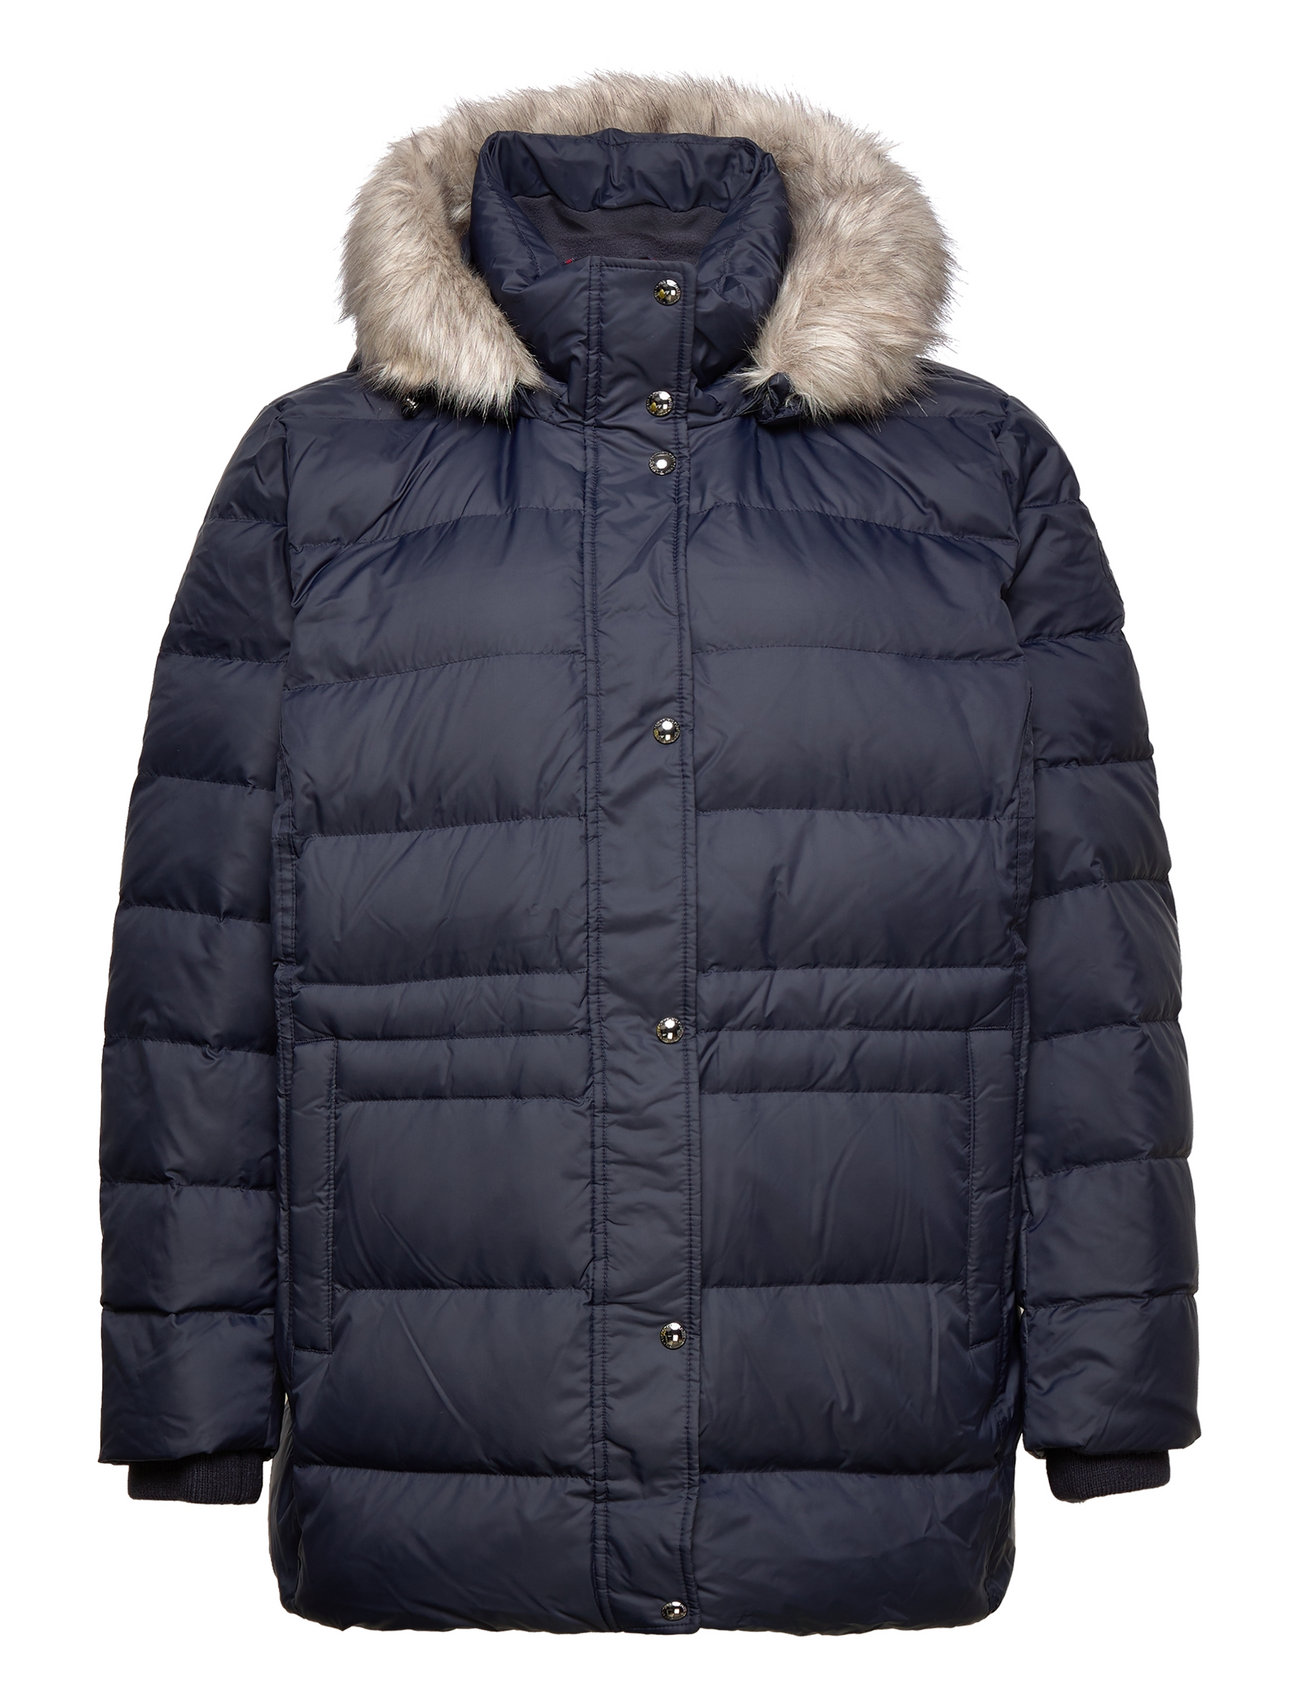 delivery Padded €. from Tyra Hilfiger Fast Hilfiger returns and Tommy Boozt.com. - at Fur Tommy easy Th Coats Crv Down 329.90 Buy online Jkt Ess